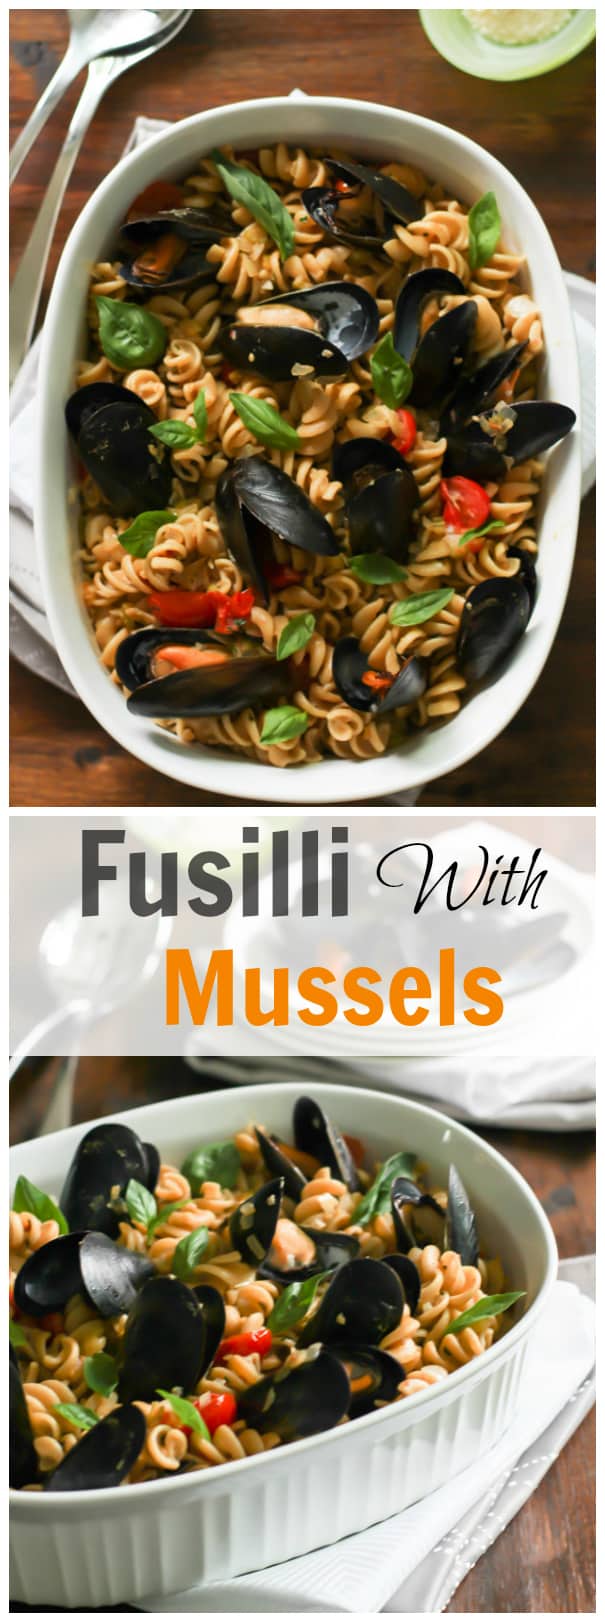 Fusilli with Mussels